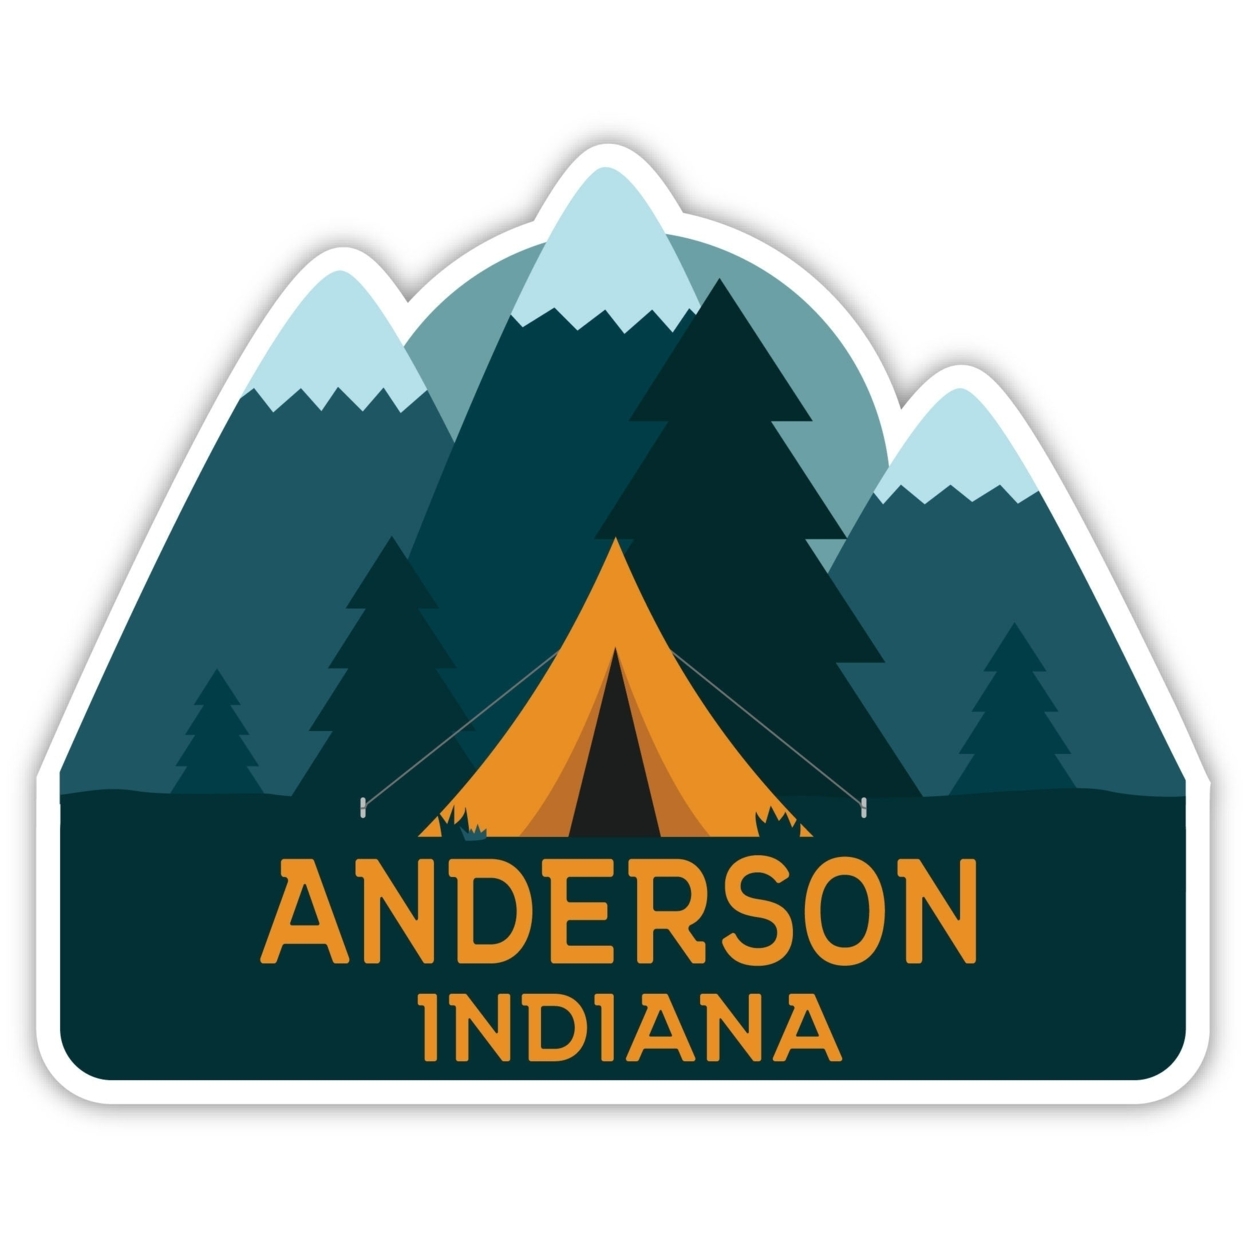 Anderson Indiana Souvenir Decorative Stickers (Choose Theme And Size) - Single Unit, 6-Inch, Tent